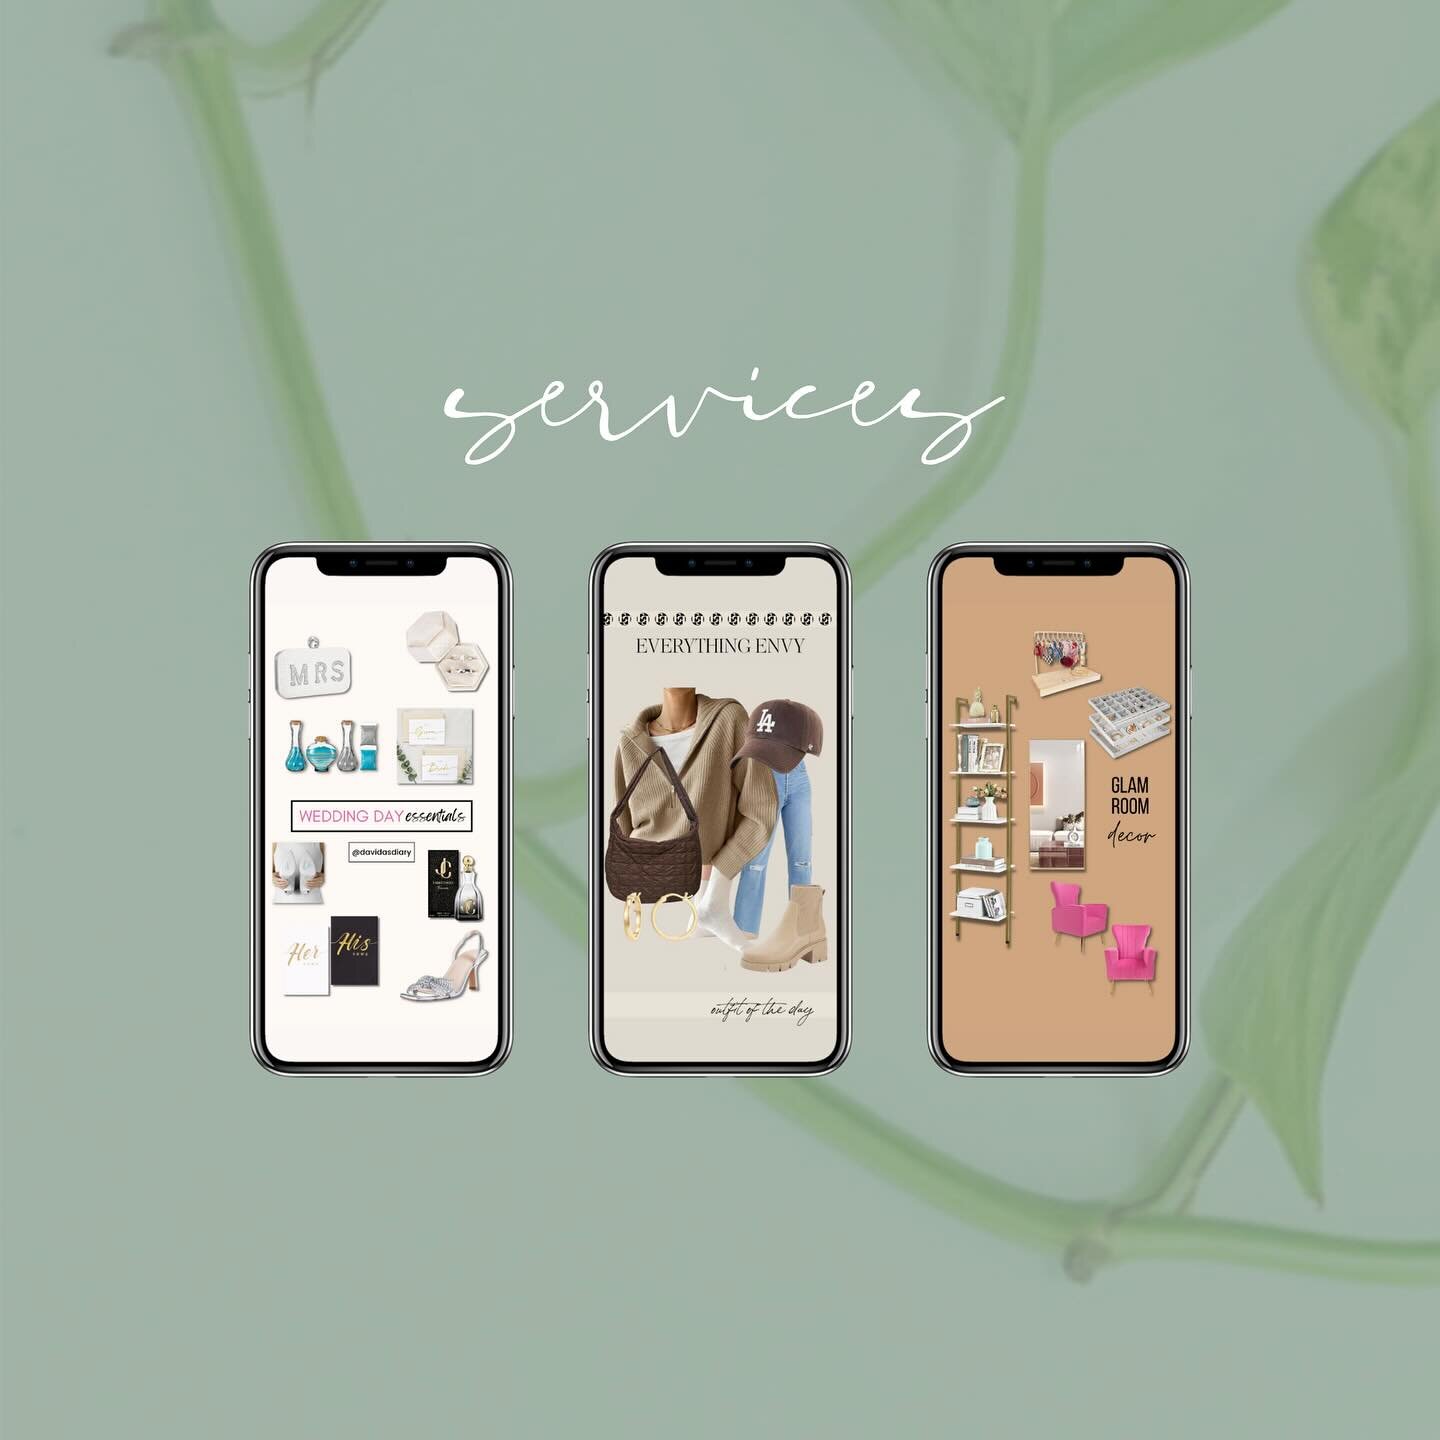 OUR SERVICES (swipe to see samples of our work)✨

EMAIL NEWSLETTERS: We&rsquo;ll do everything from writing the email to making it beautiful, all you have to do is meet monthly to plan the content!

BLOGS: We&rsquo;ll write, format &amp; SEO optimize